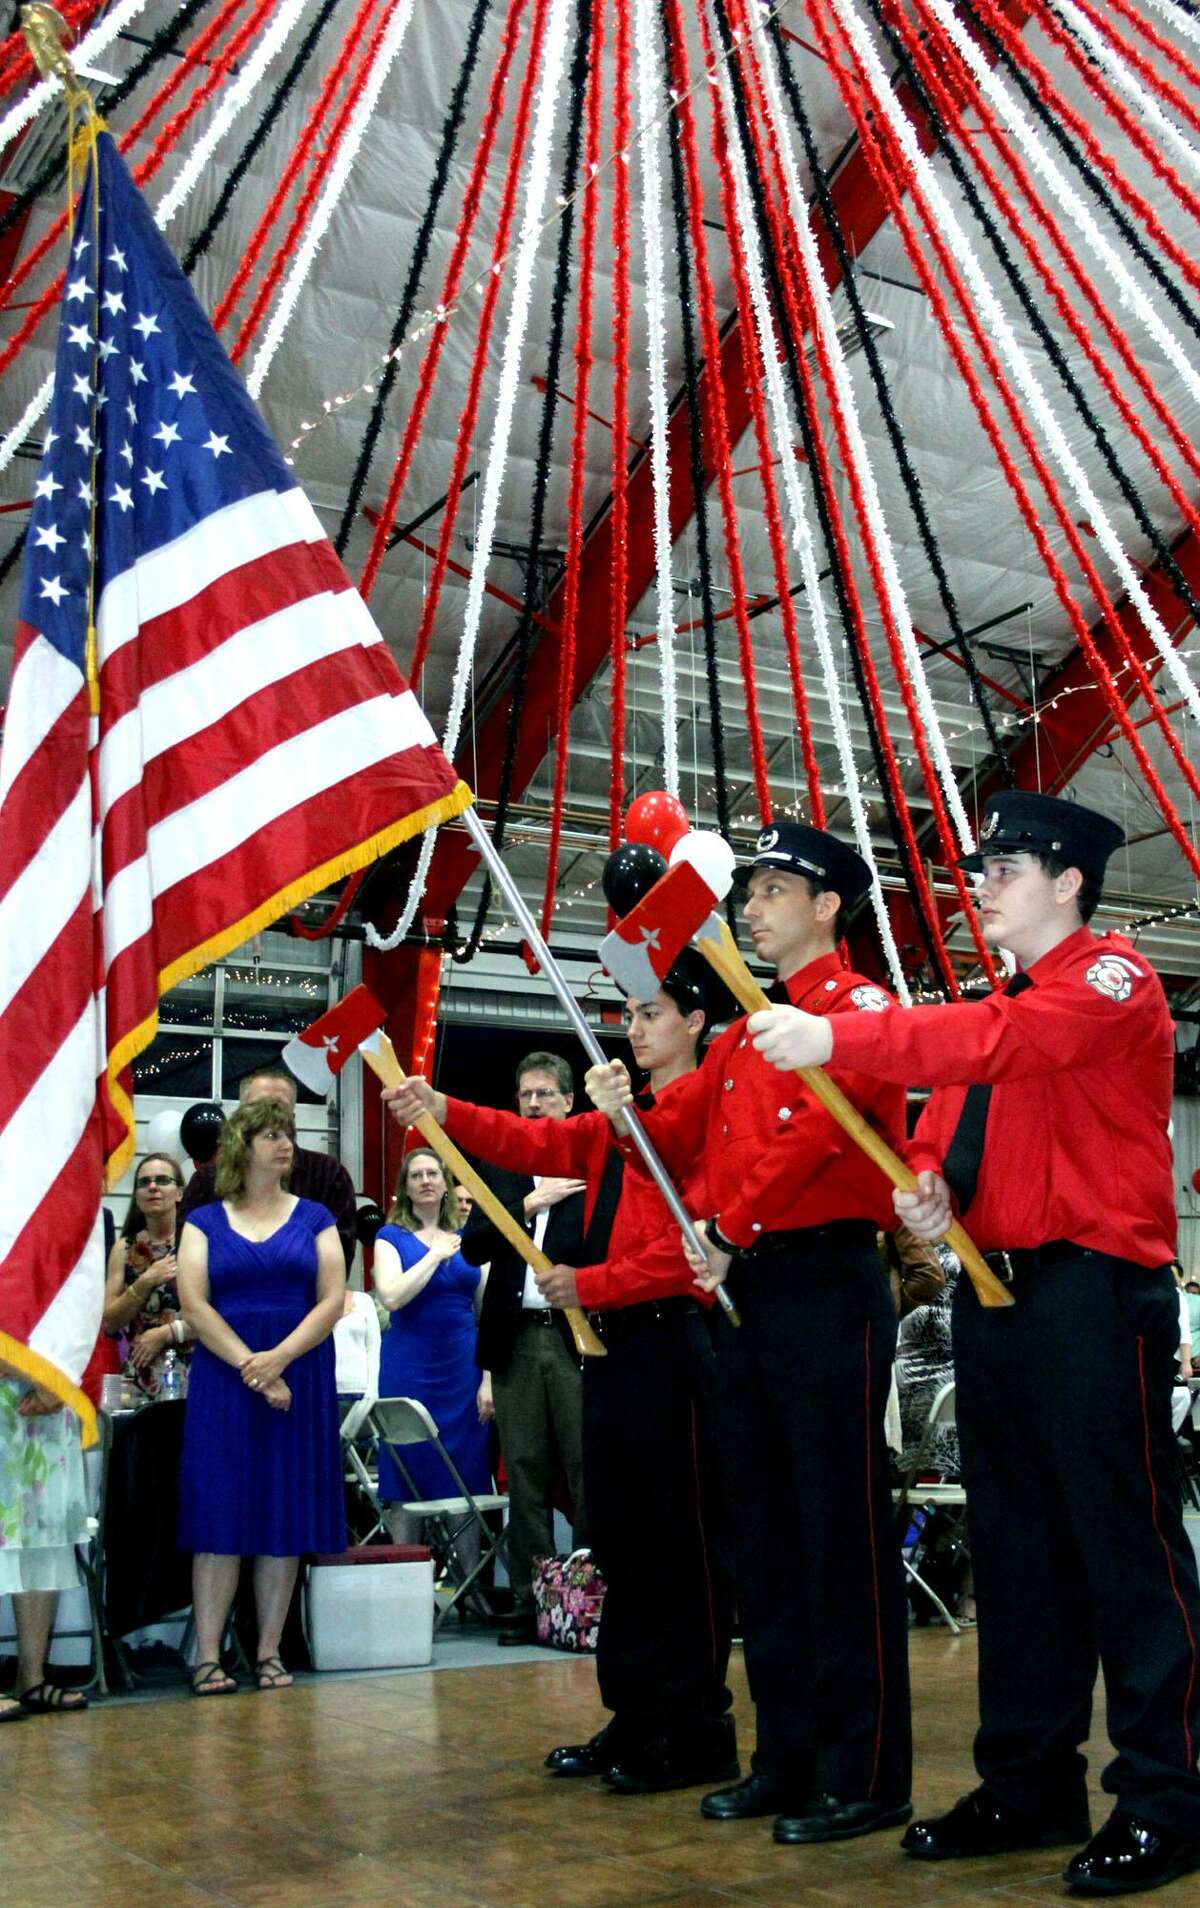 For more than 100 years, residents have enjoyed the Kent Volunteer Fire Department’s Firemen’s Ball. This year’s event will be held Saturday at the KVFD firehouse, 28 Maple Street. Pictured is the Firemen’s Ball in 2011, where the honor guard joined in the 100th anniversary celebration.